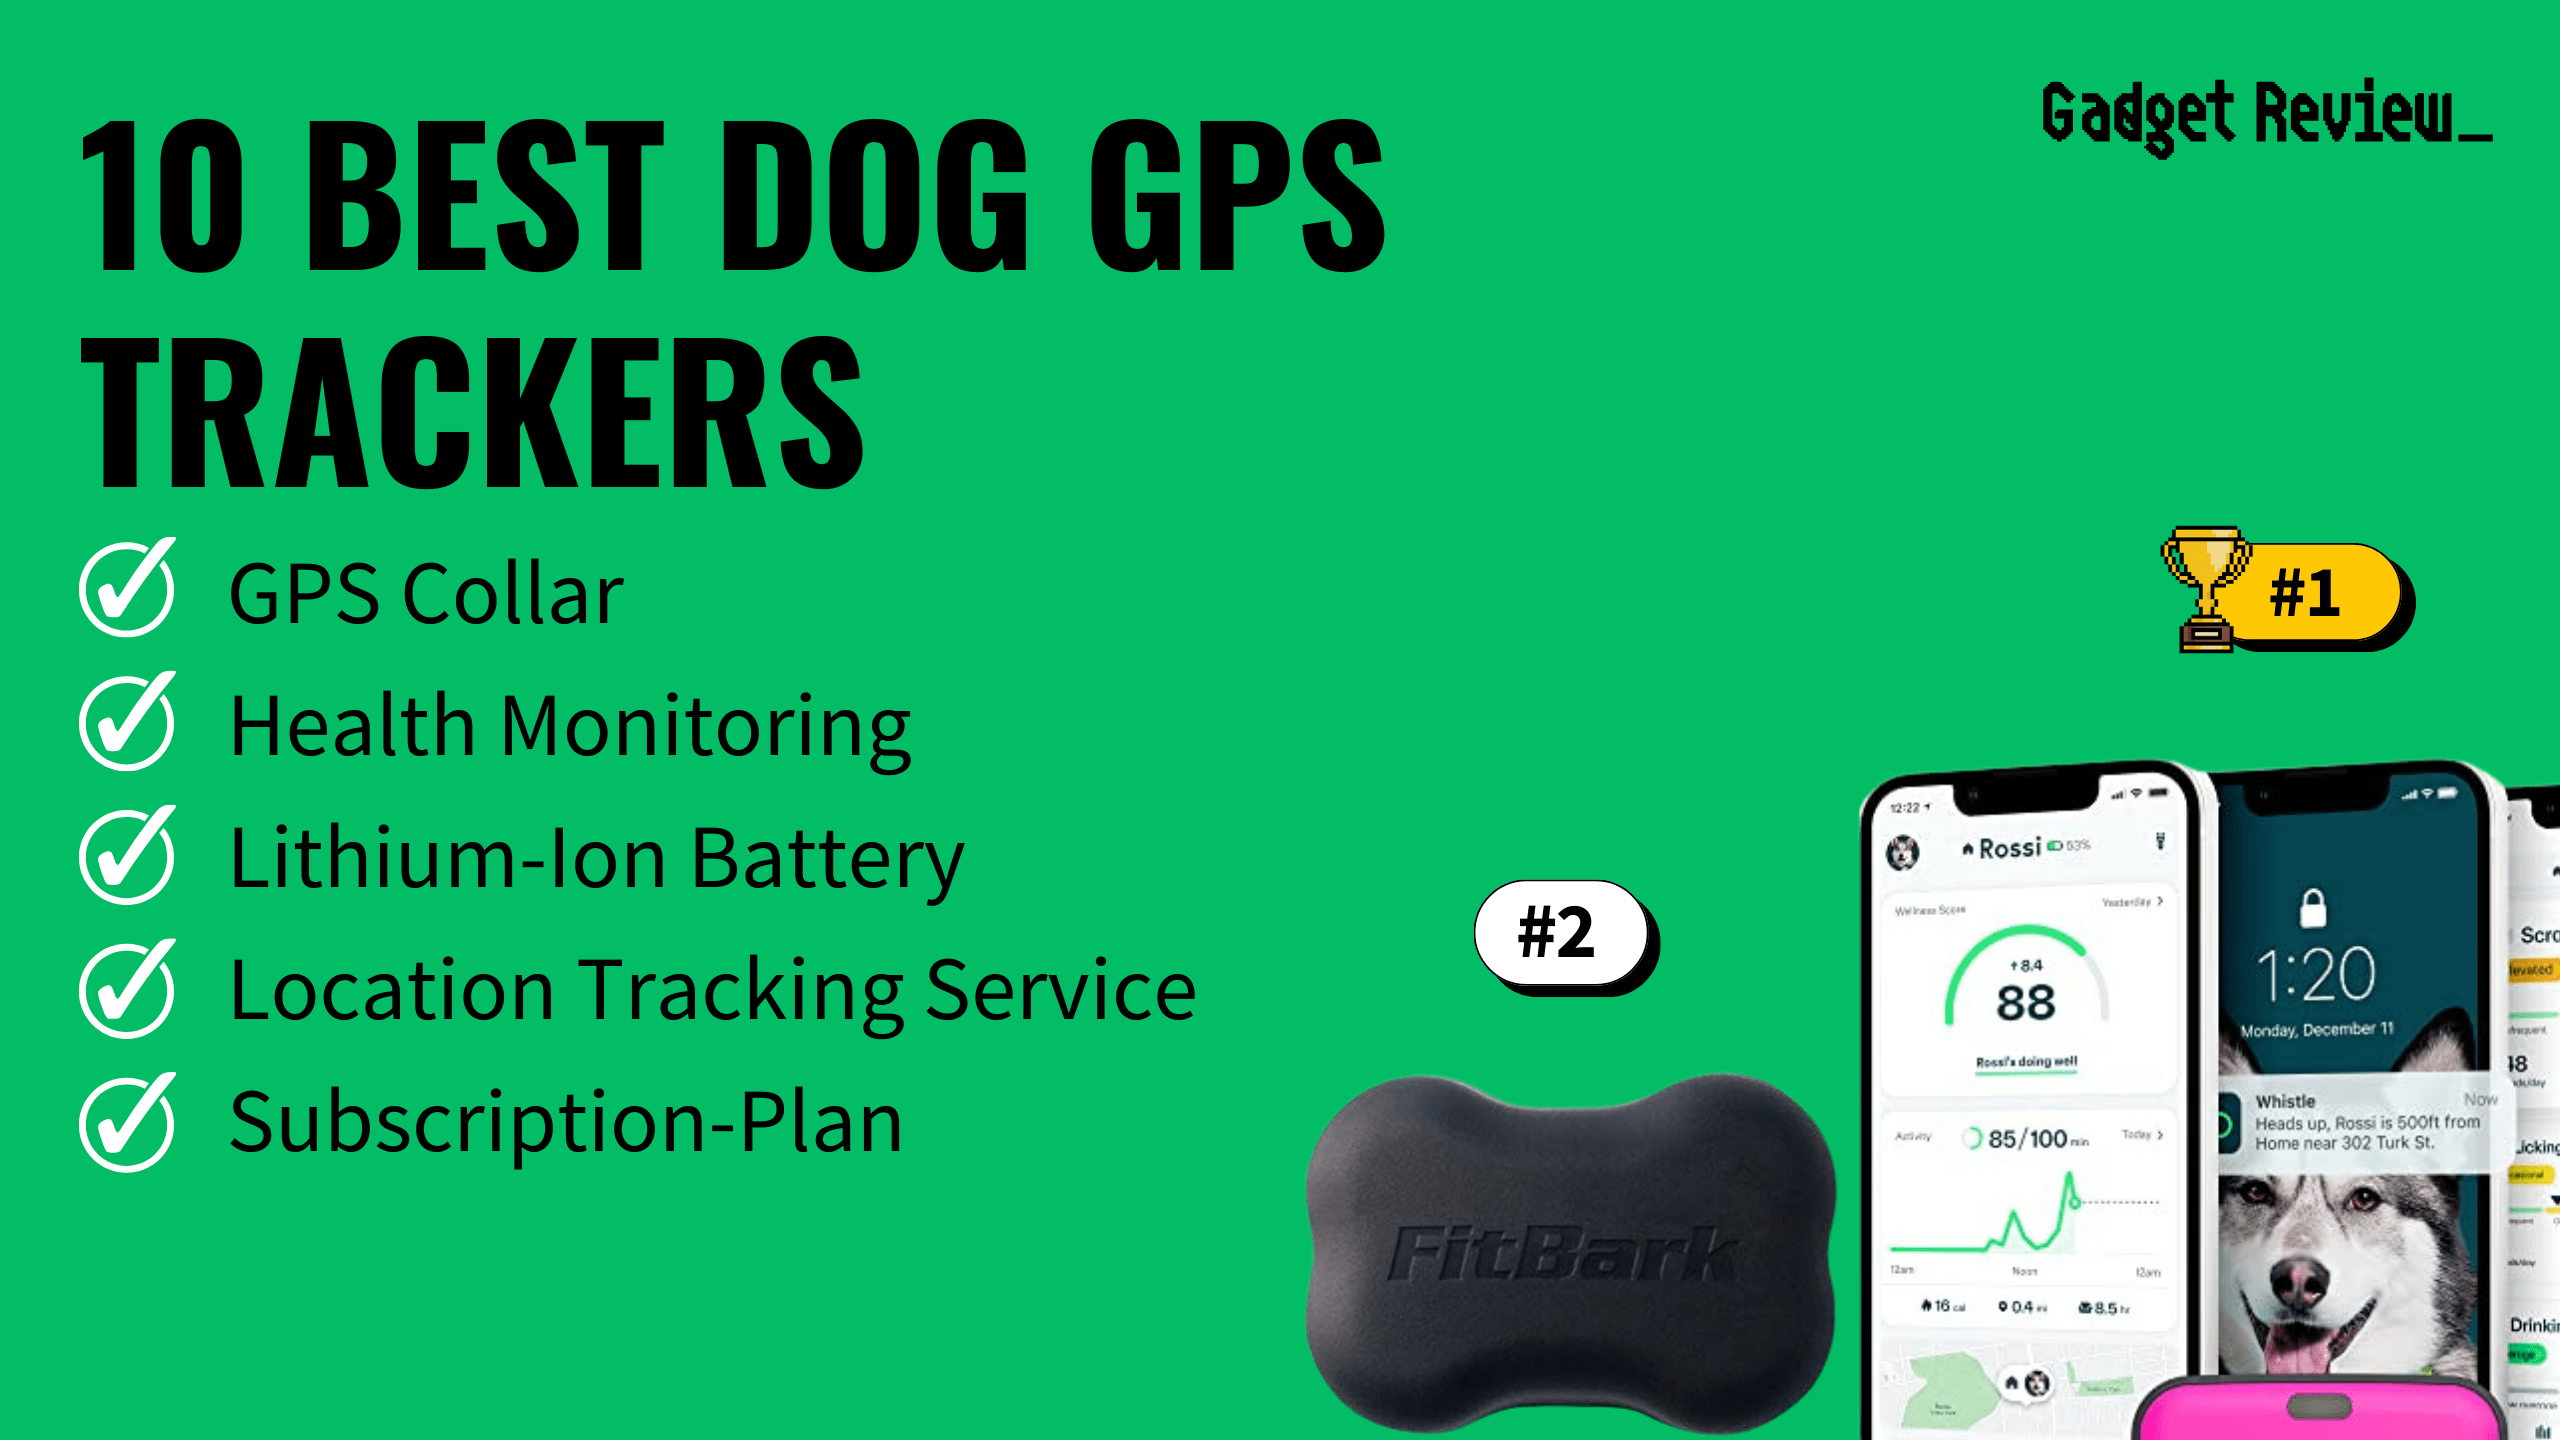 10 Best Dog GPS Trackers